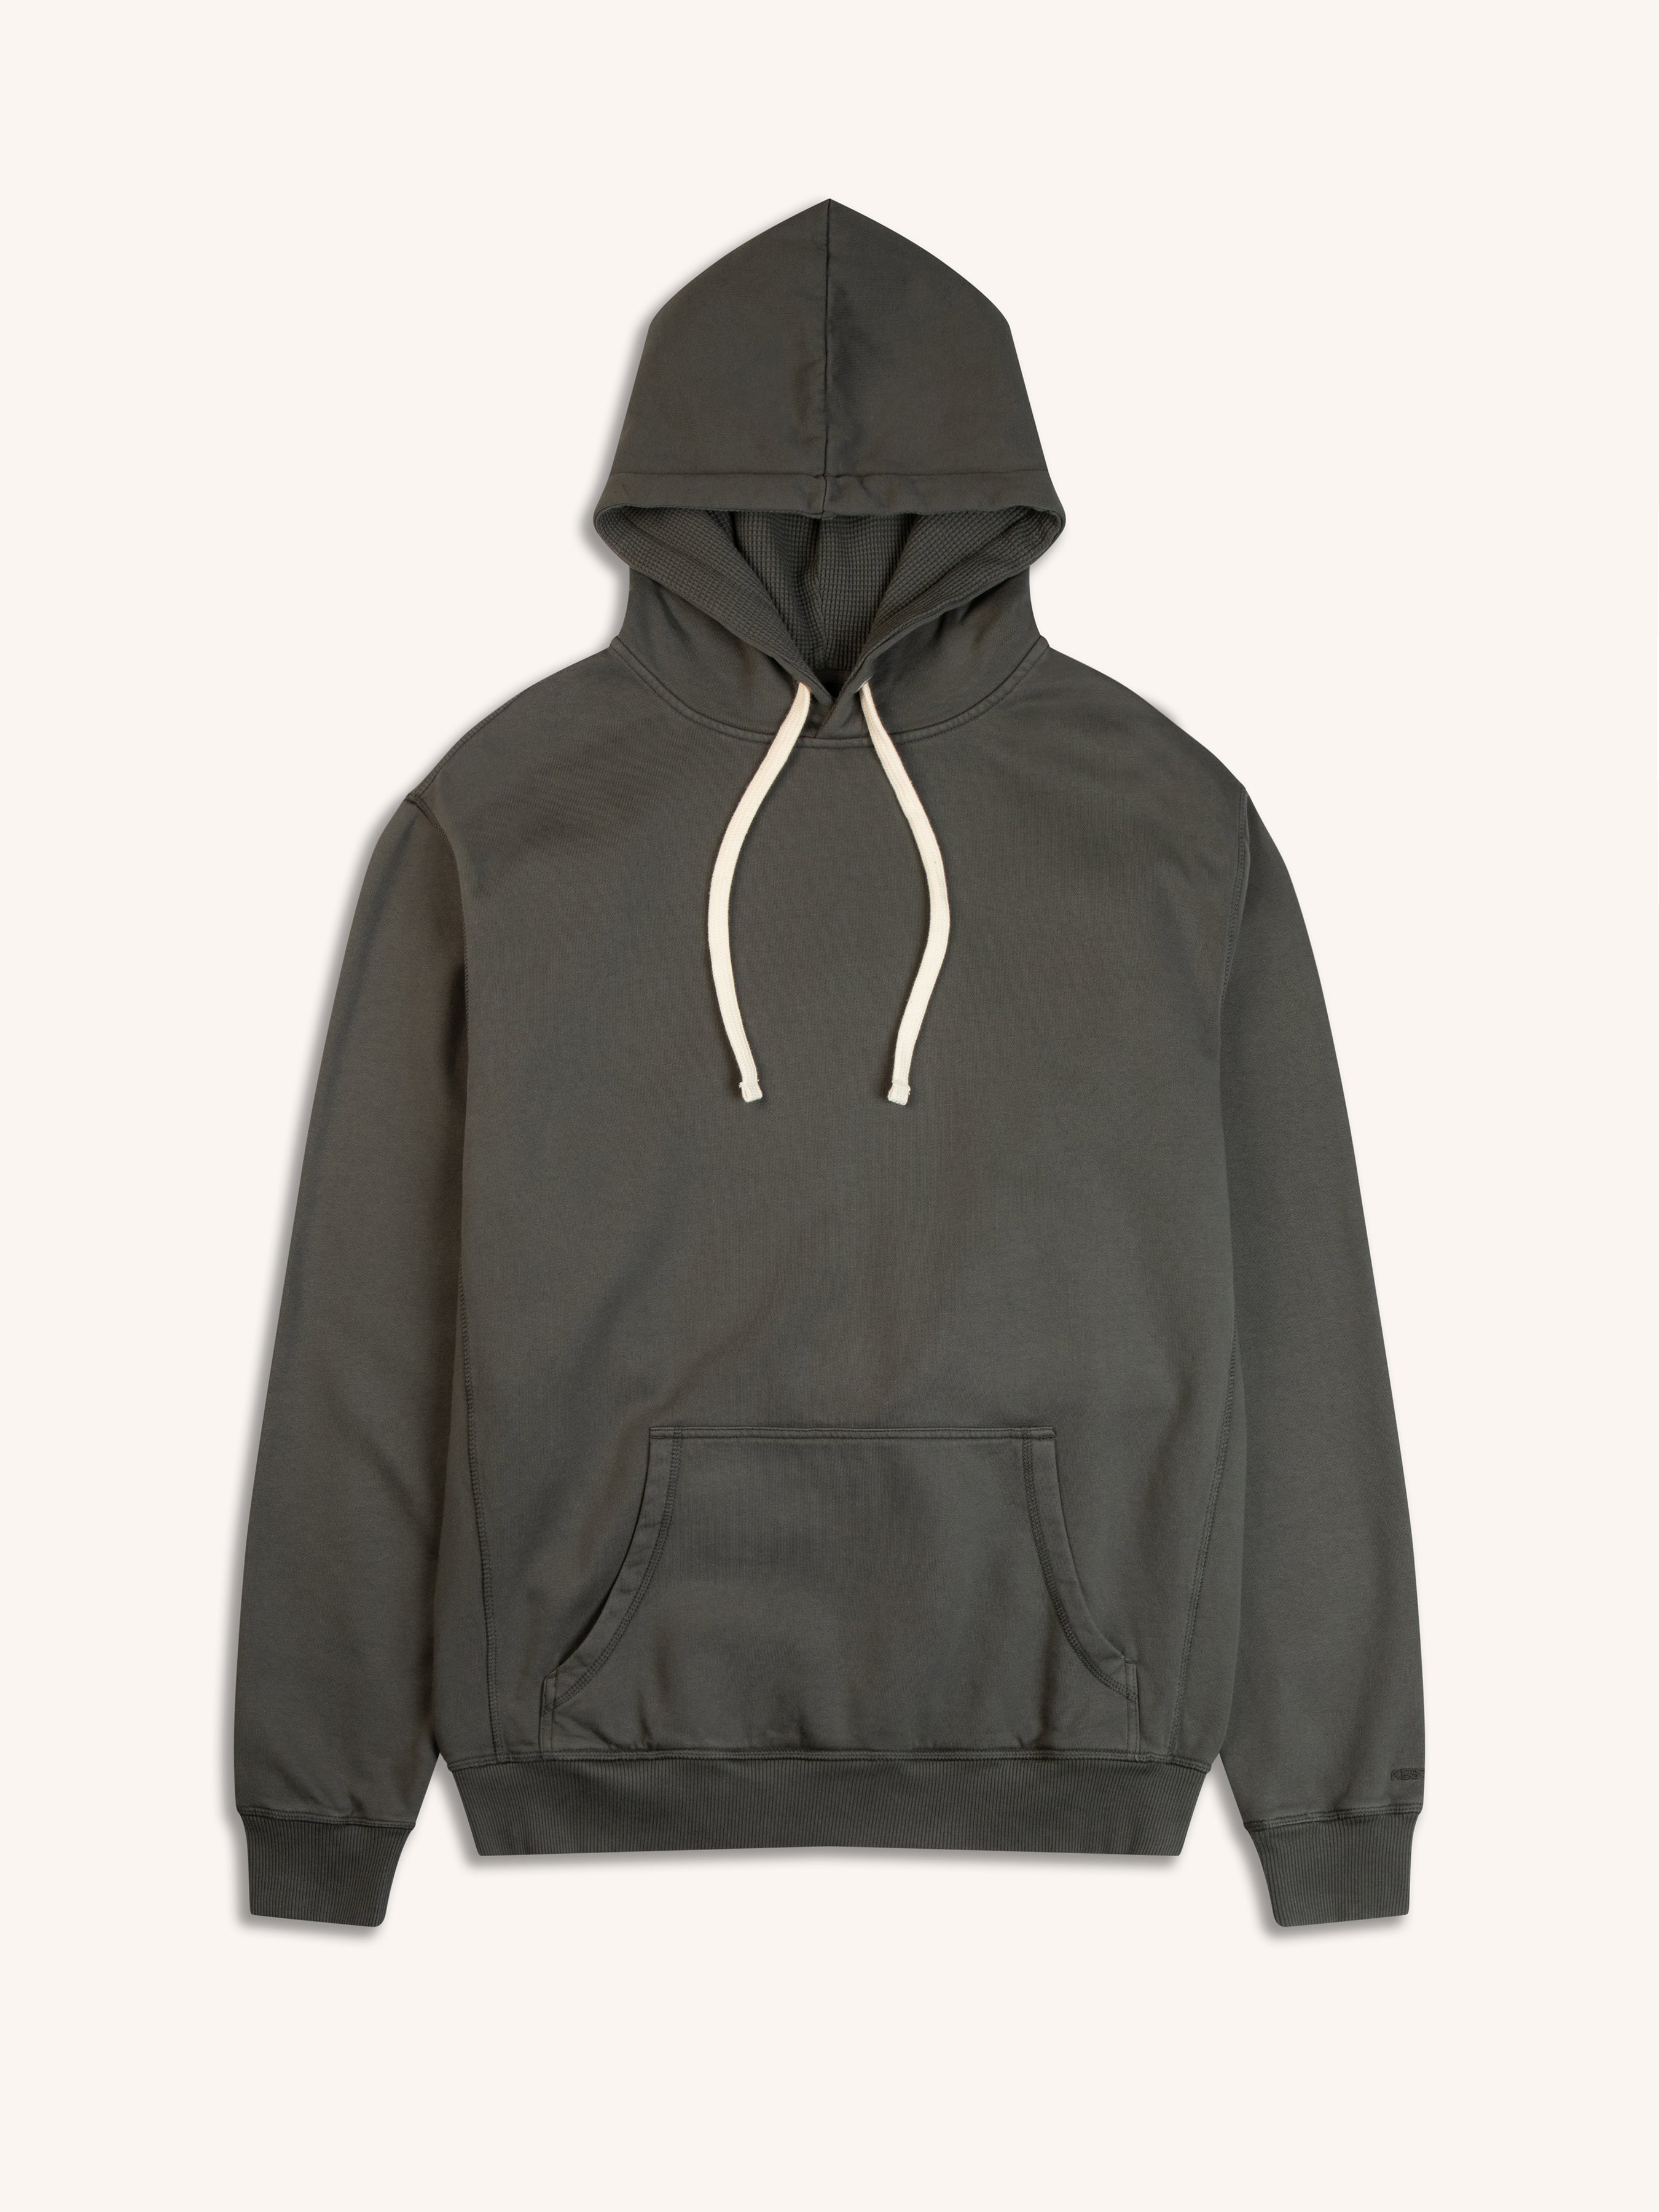 A pullover hoodie from Scottish menswear brand KESTIN, in charcoal grey, on a white background.